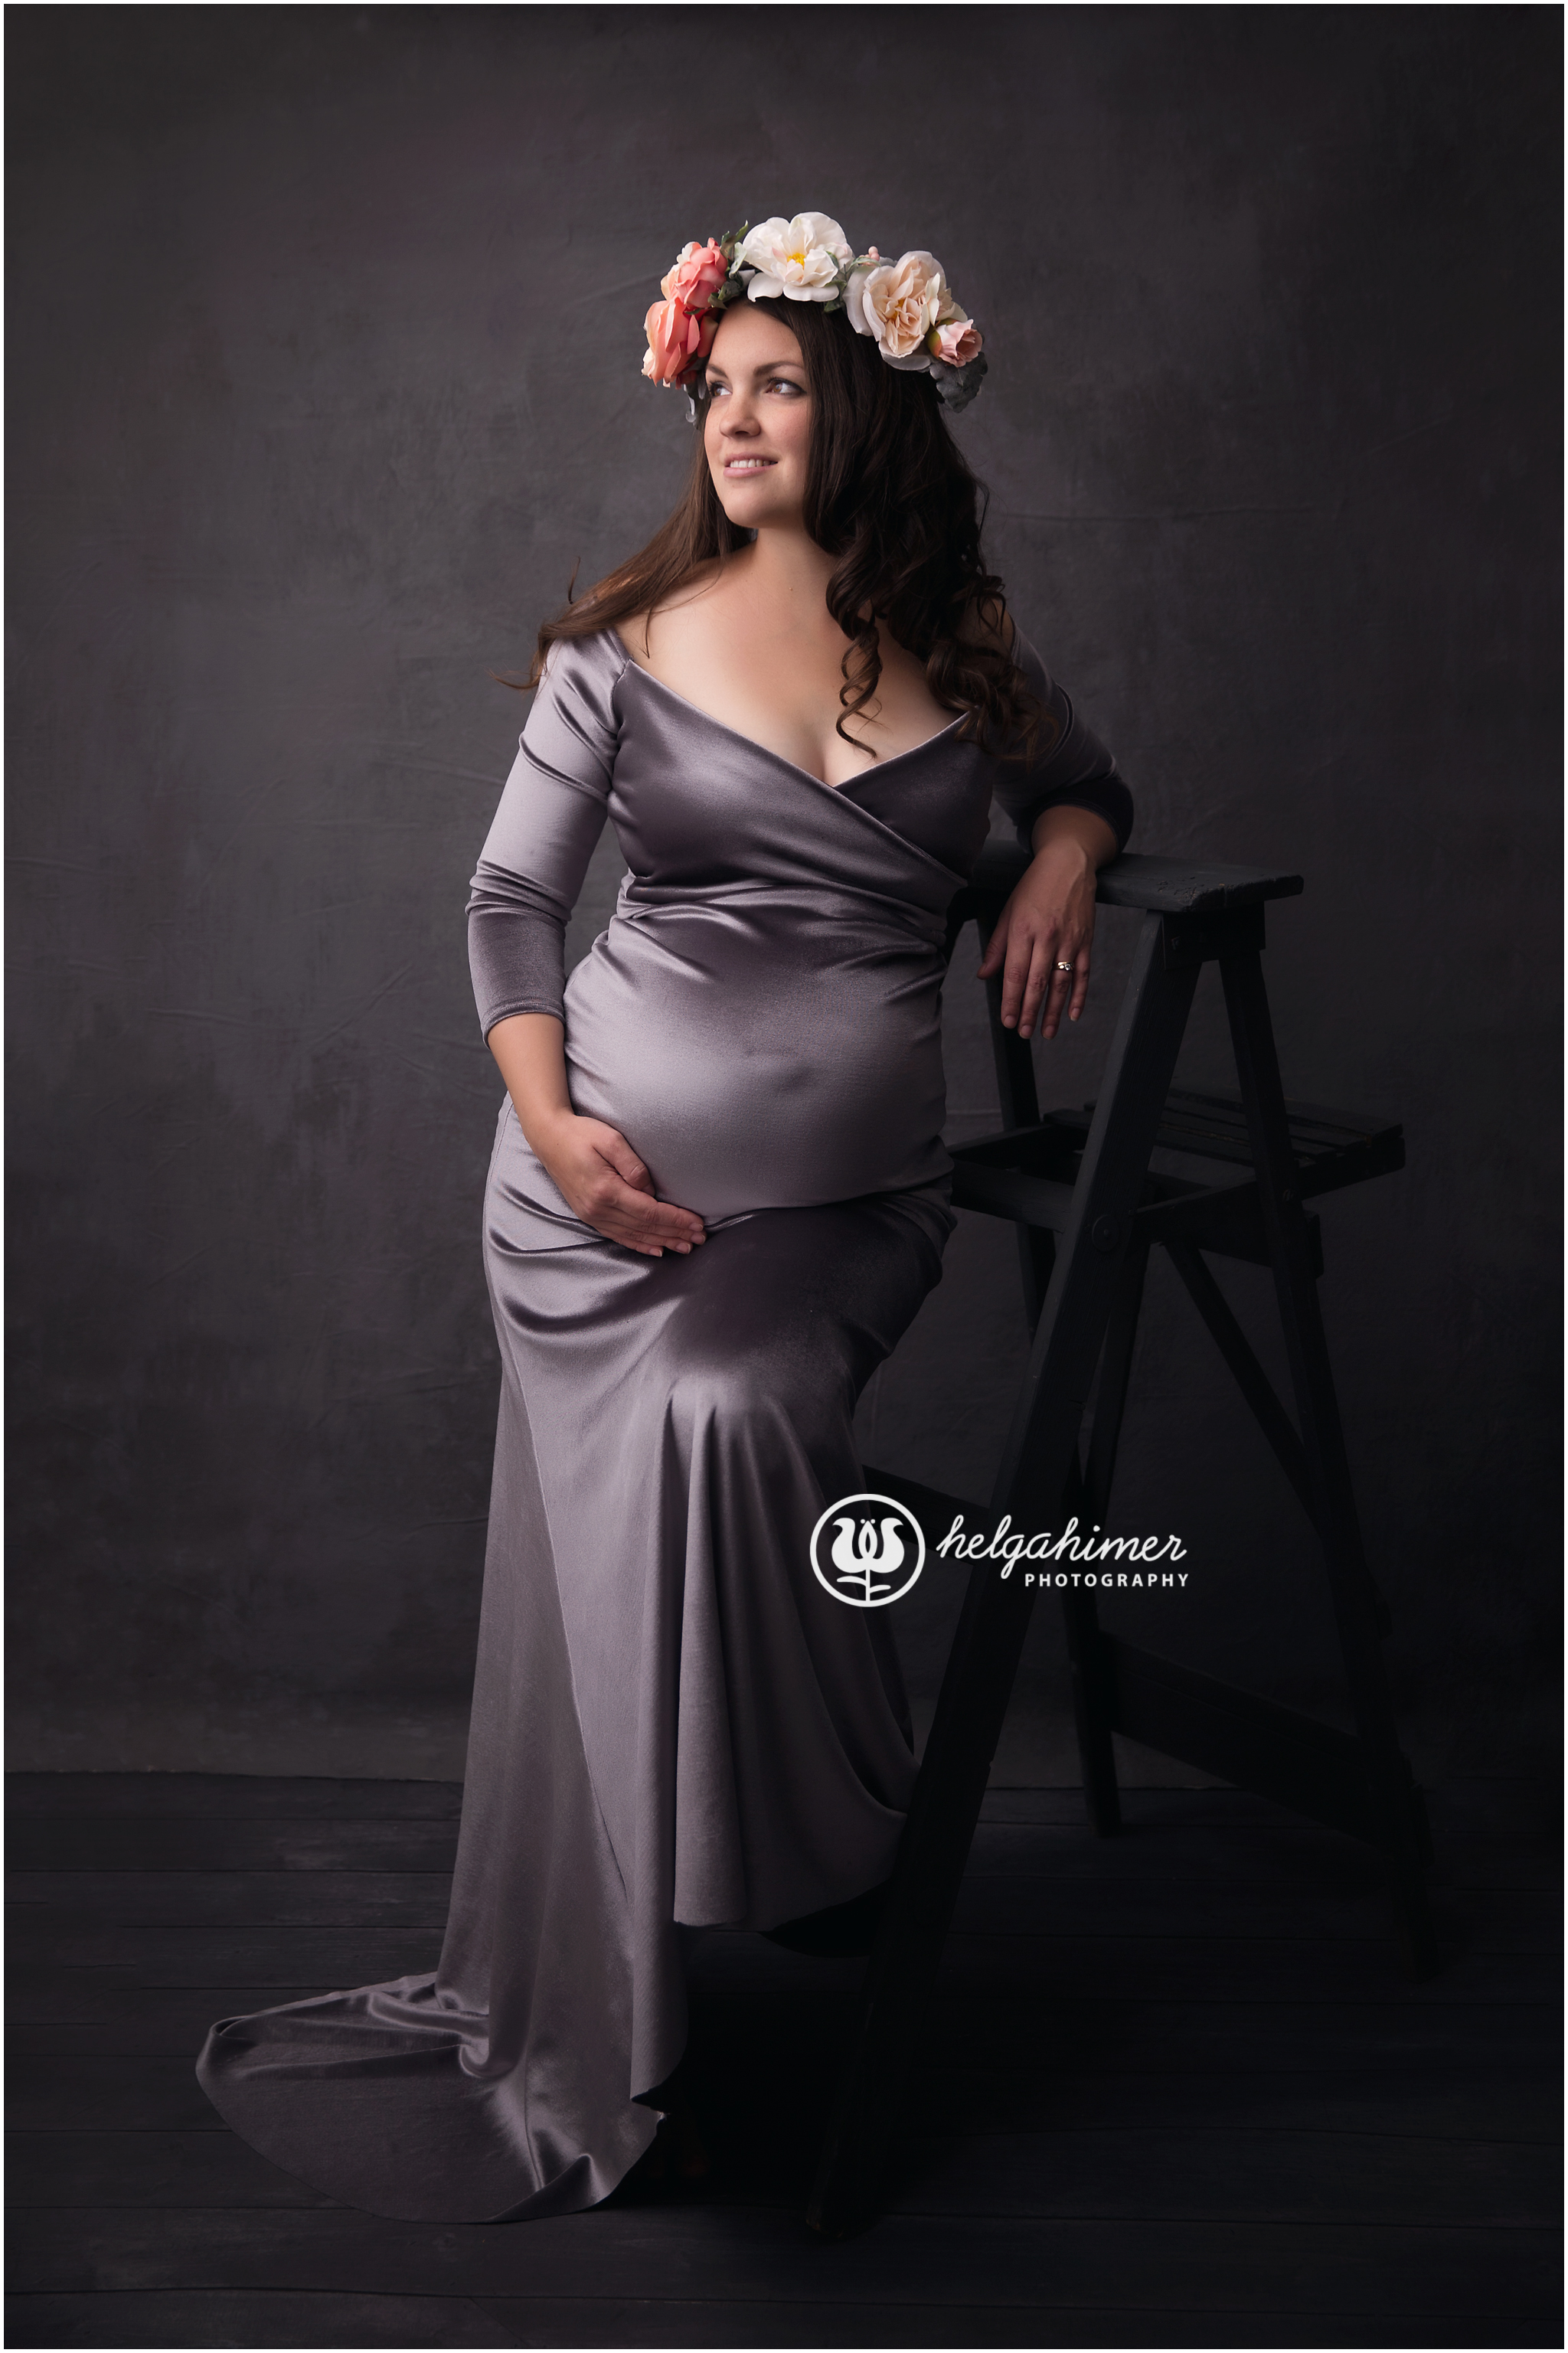 sutdio maternity photo with gray dress and flowercrown, babylove spring expecting mother event at helga himer sudbury studio